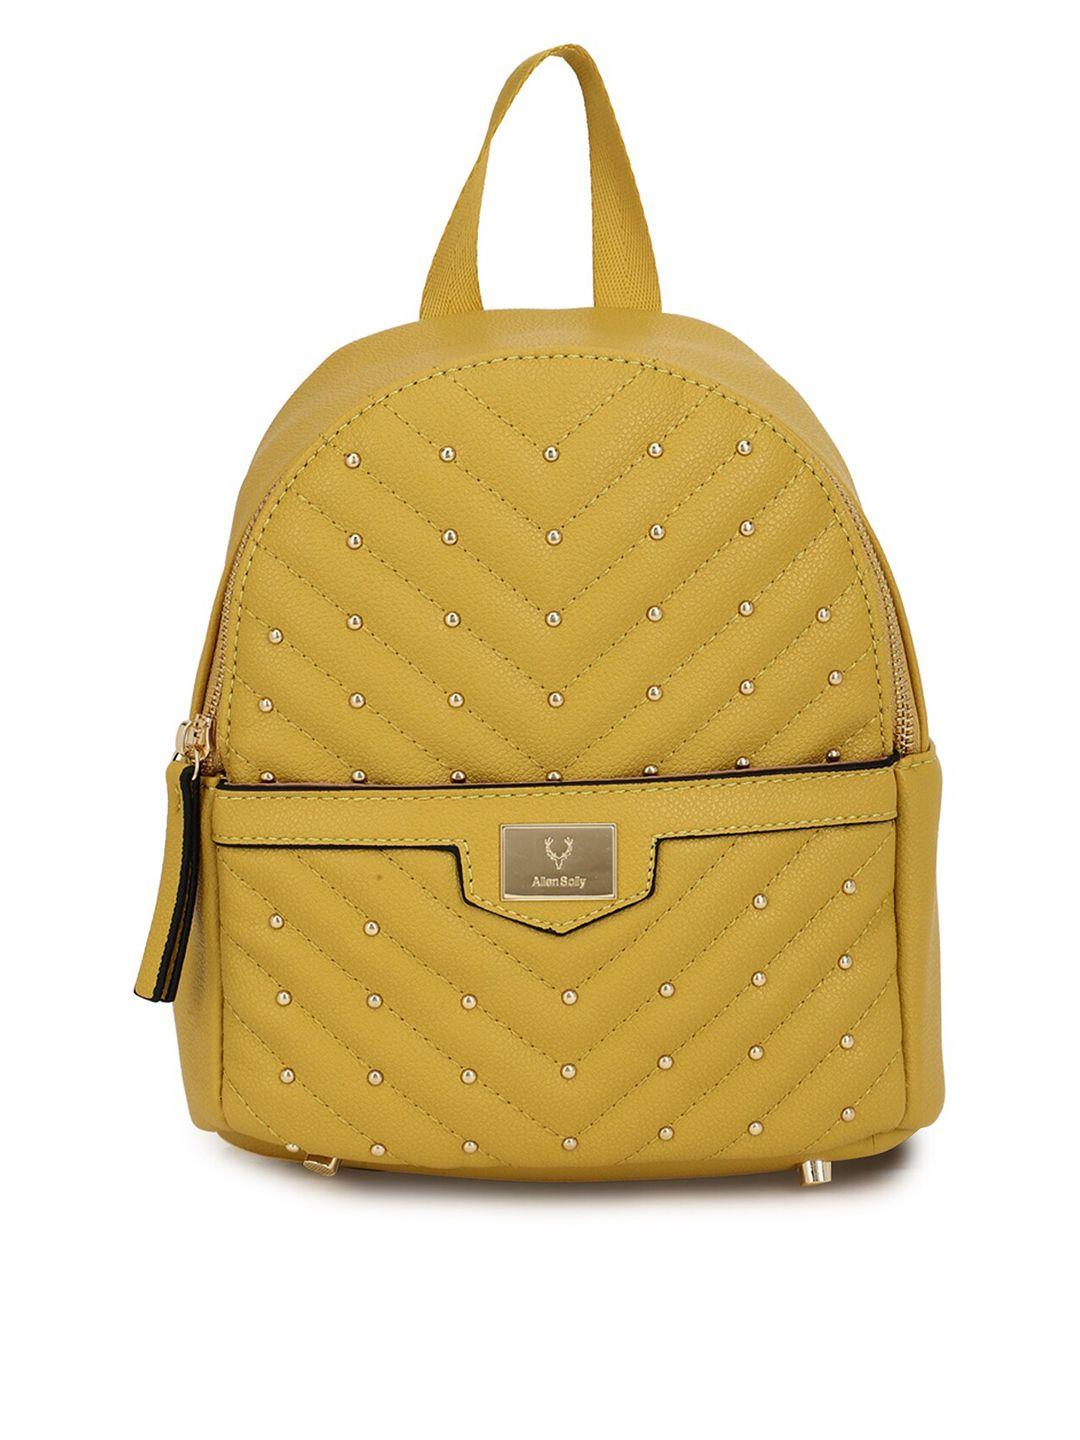 allen solly geometric patterned backpack